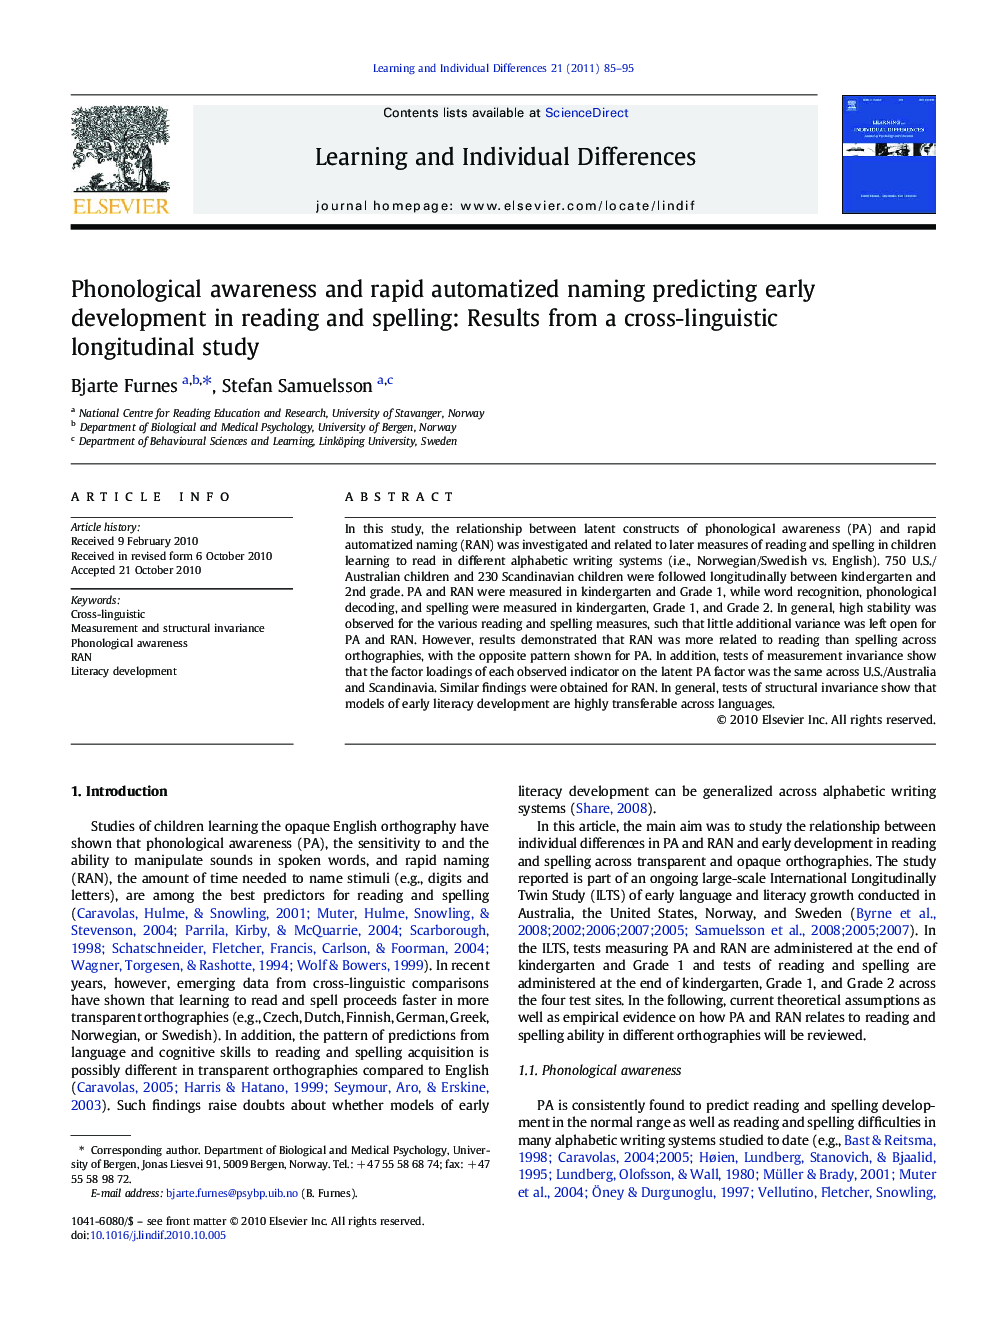 Phonological awareness and rapid automatized naming predicting early development in reading and spelling: Results from a cross-linguistic longitudinal study